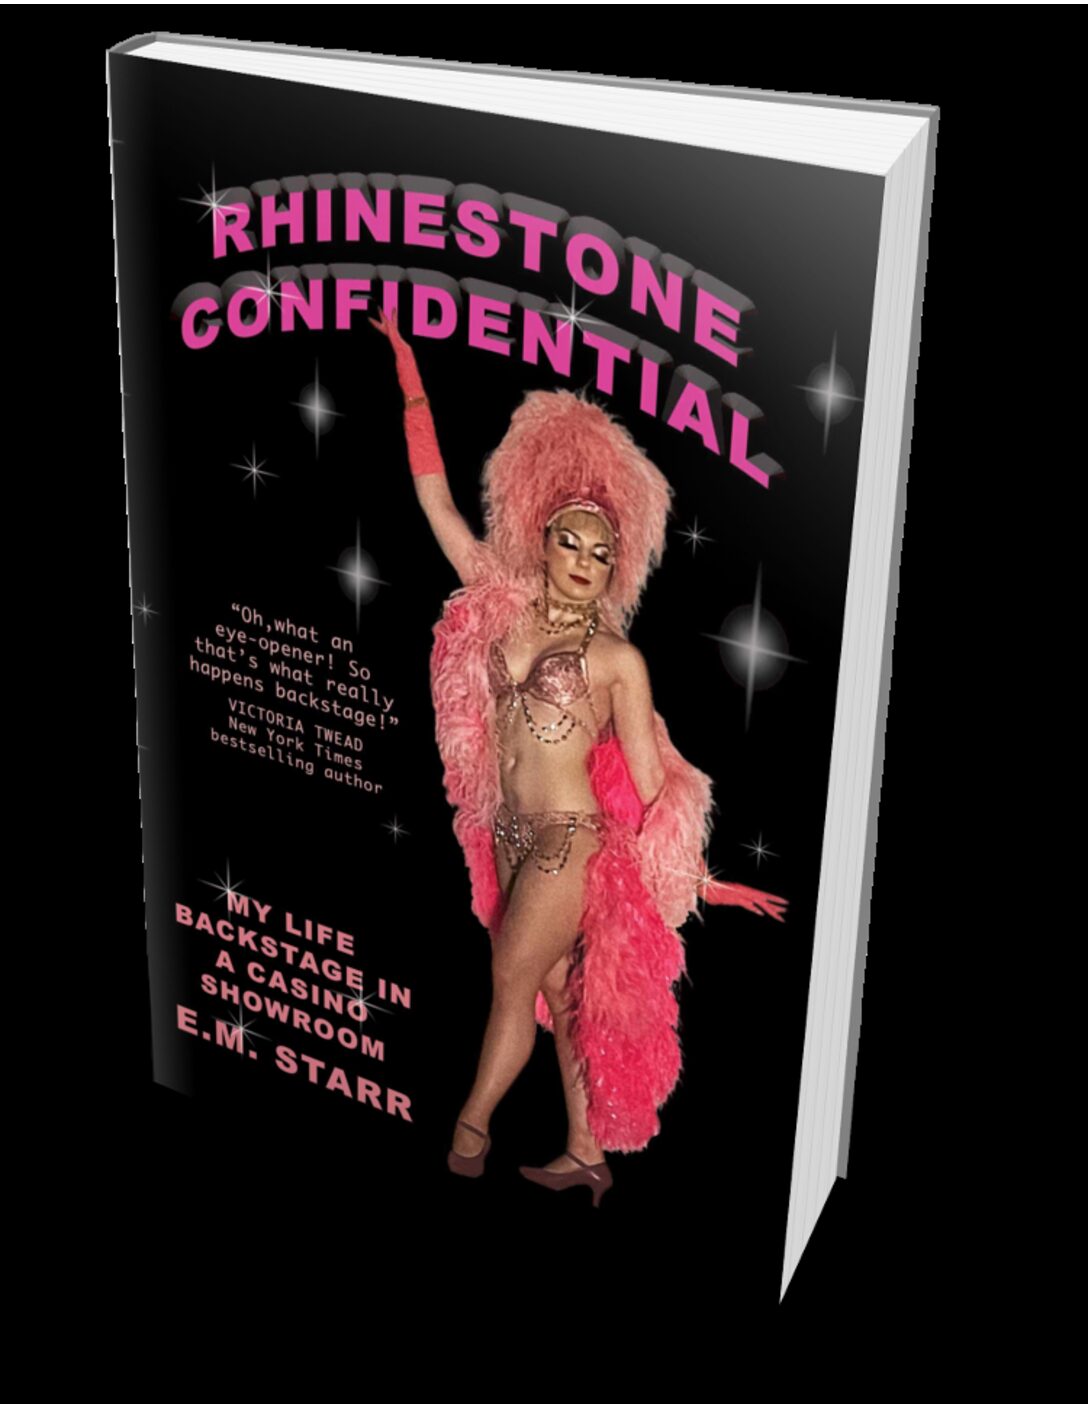 Product image of  Rhinestone Confidential by E. M. Starr